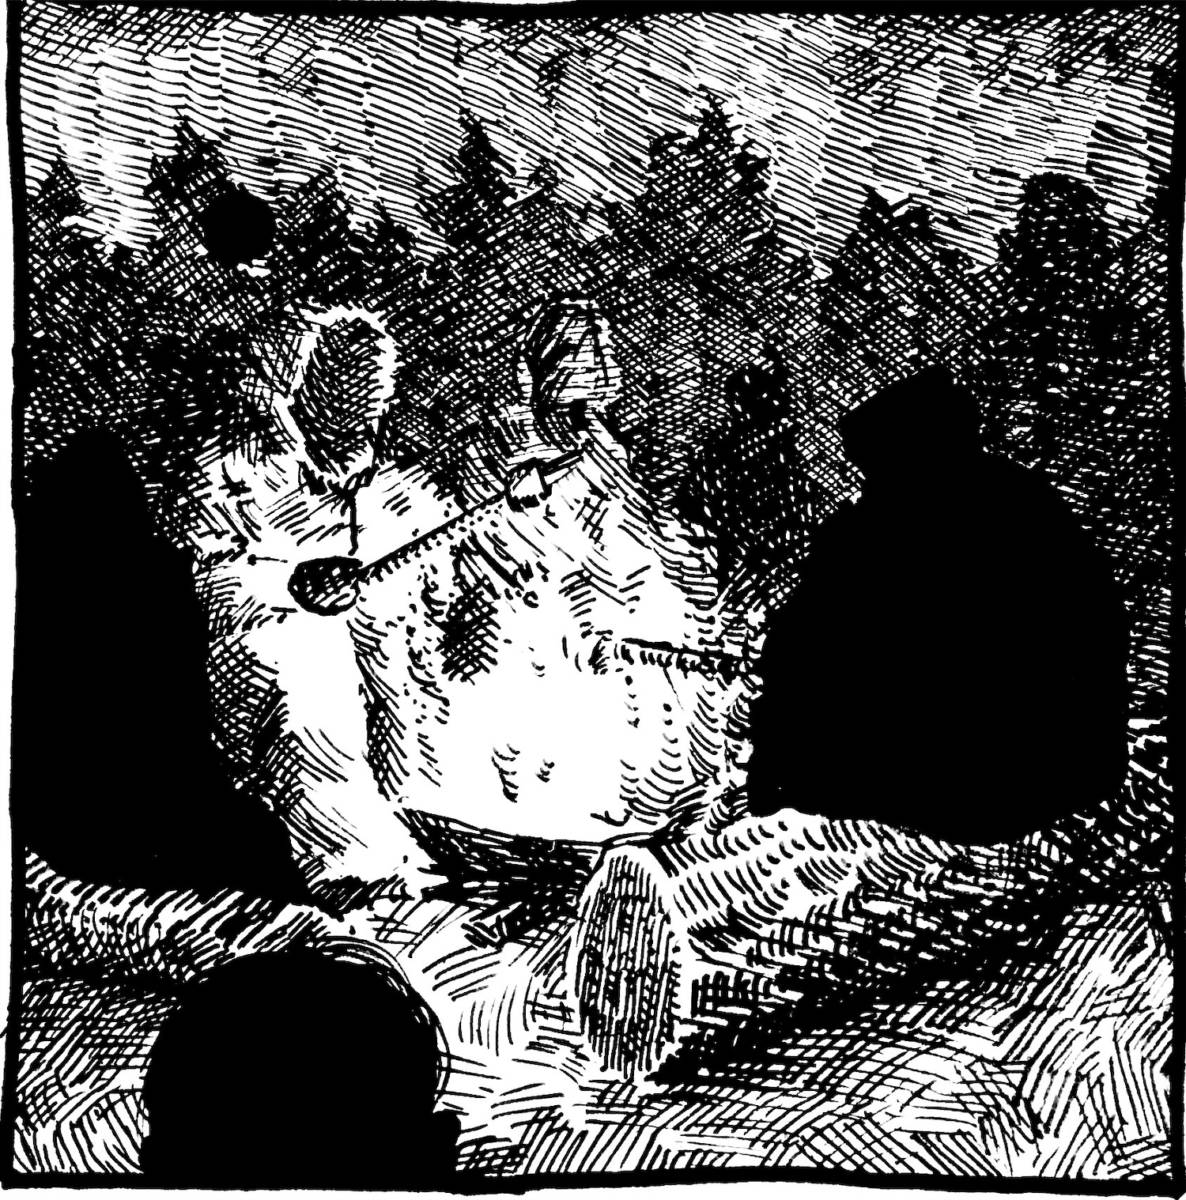 A square pen-and-ink crosshatching illustration of four figures seated on logs around an outdoor campfire.